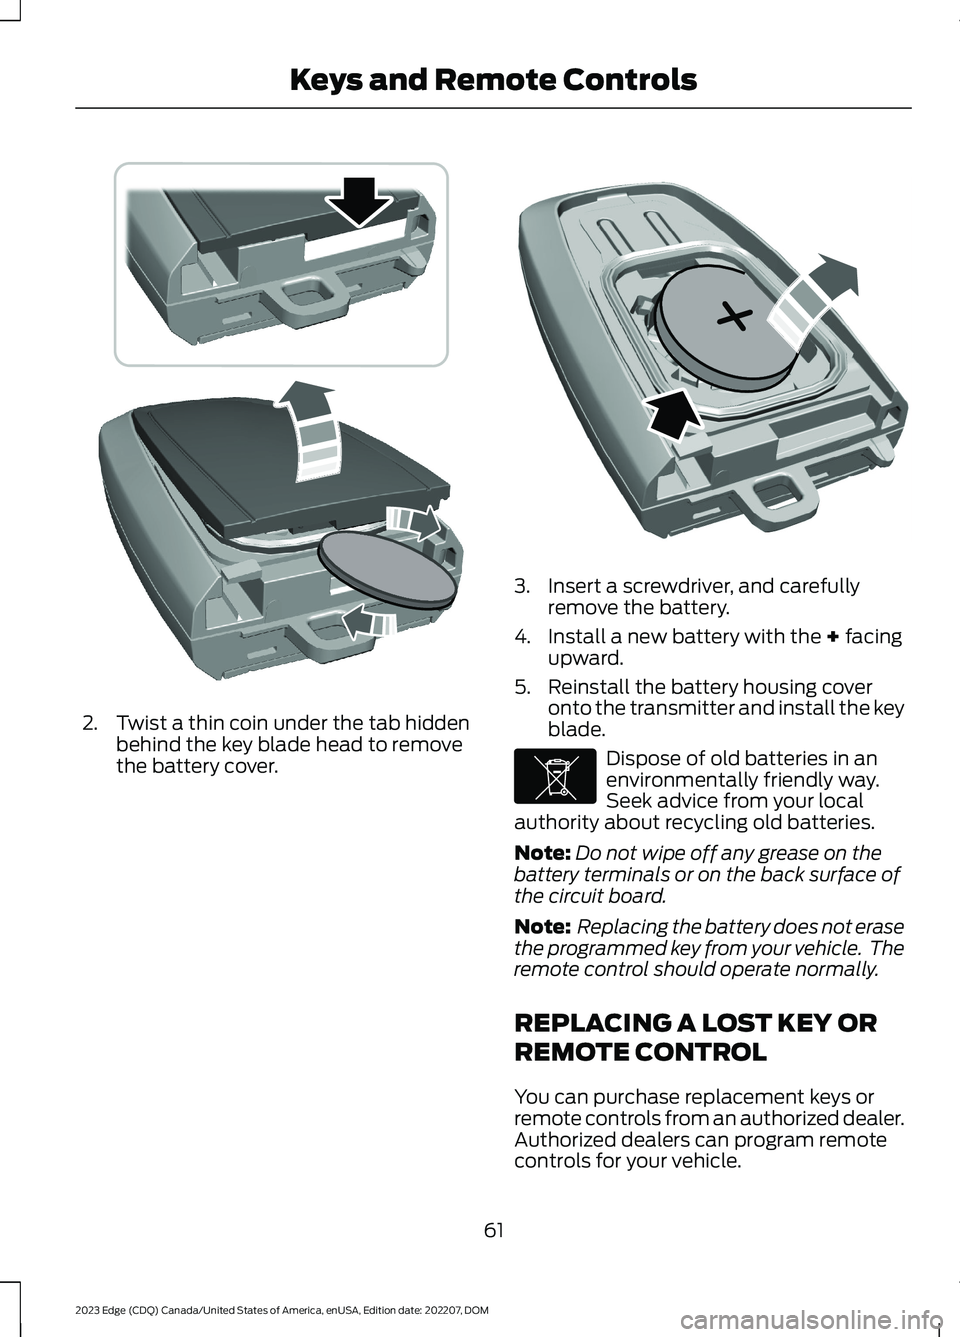 FORD EDGE 2023  Owners Manual 2.Twist a thin coin under the tab hiddenbehind the key blade head to removethe battery cover.
3.Insert a screwdriver, and carefullyremove the battery.
4.Install a new battery with the + facingupward.
